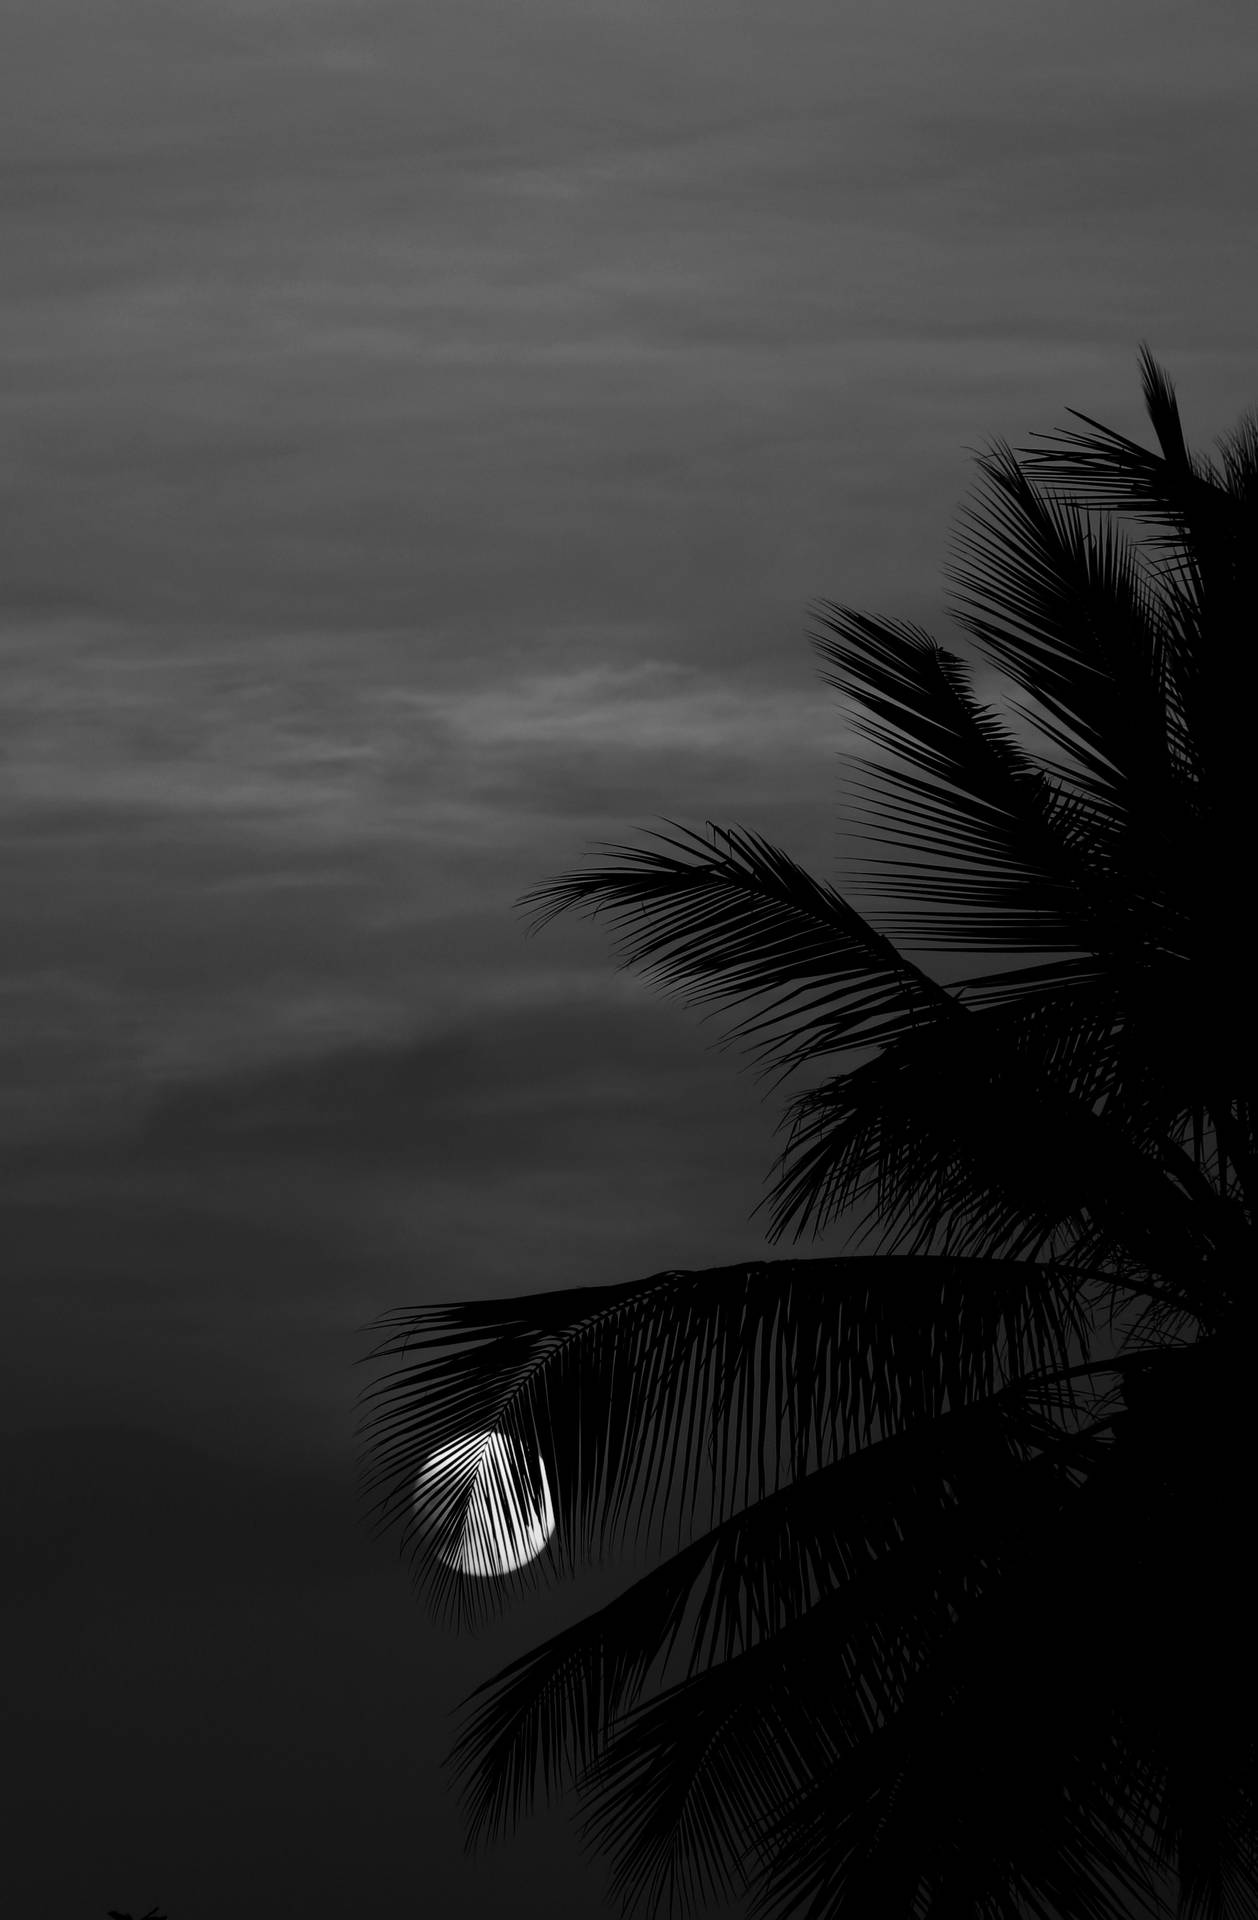 Full Moon Behind Palm Trees